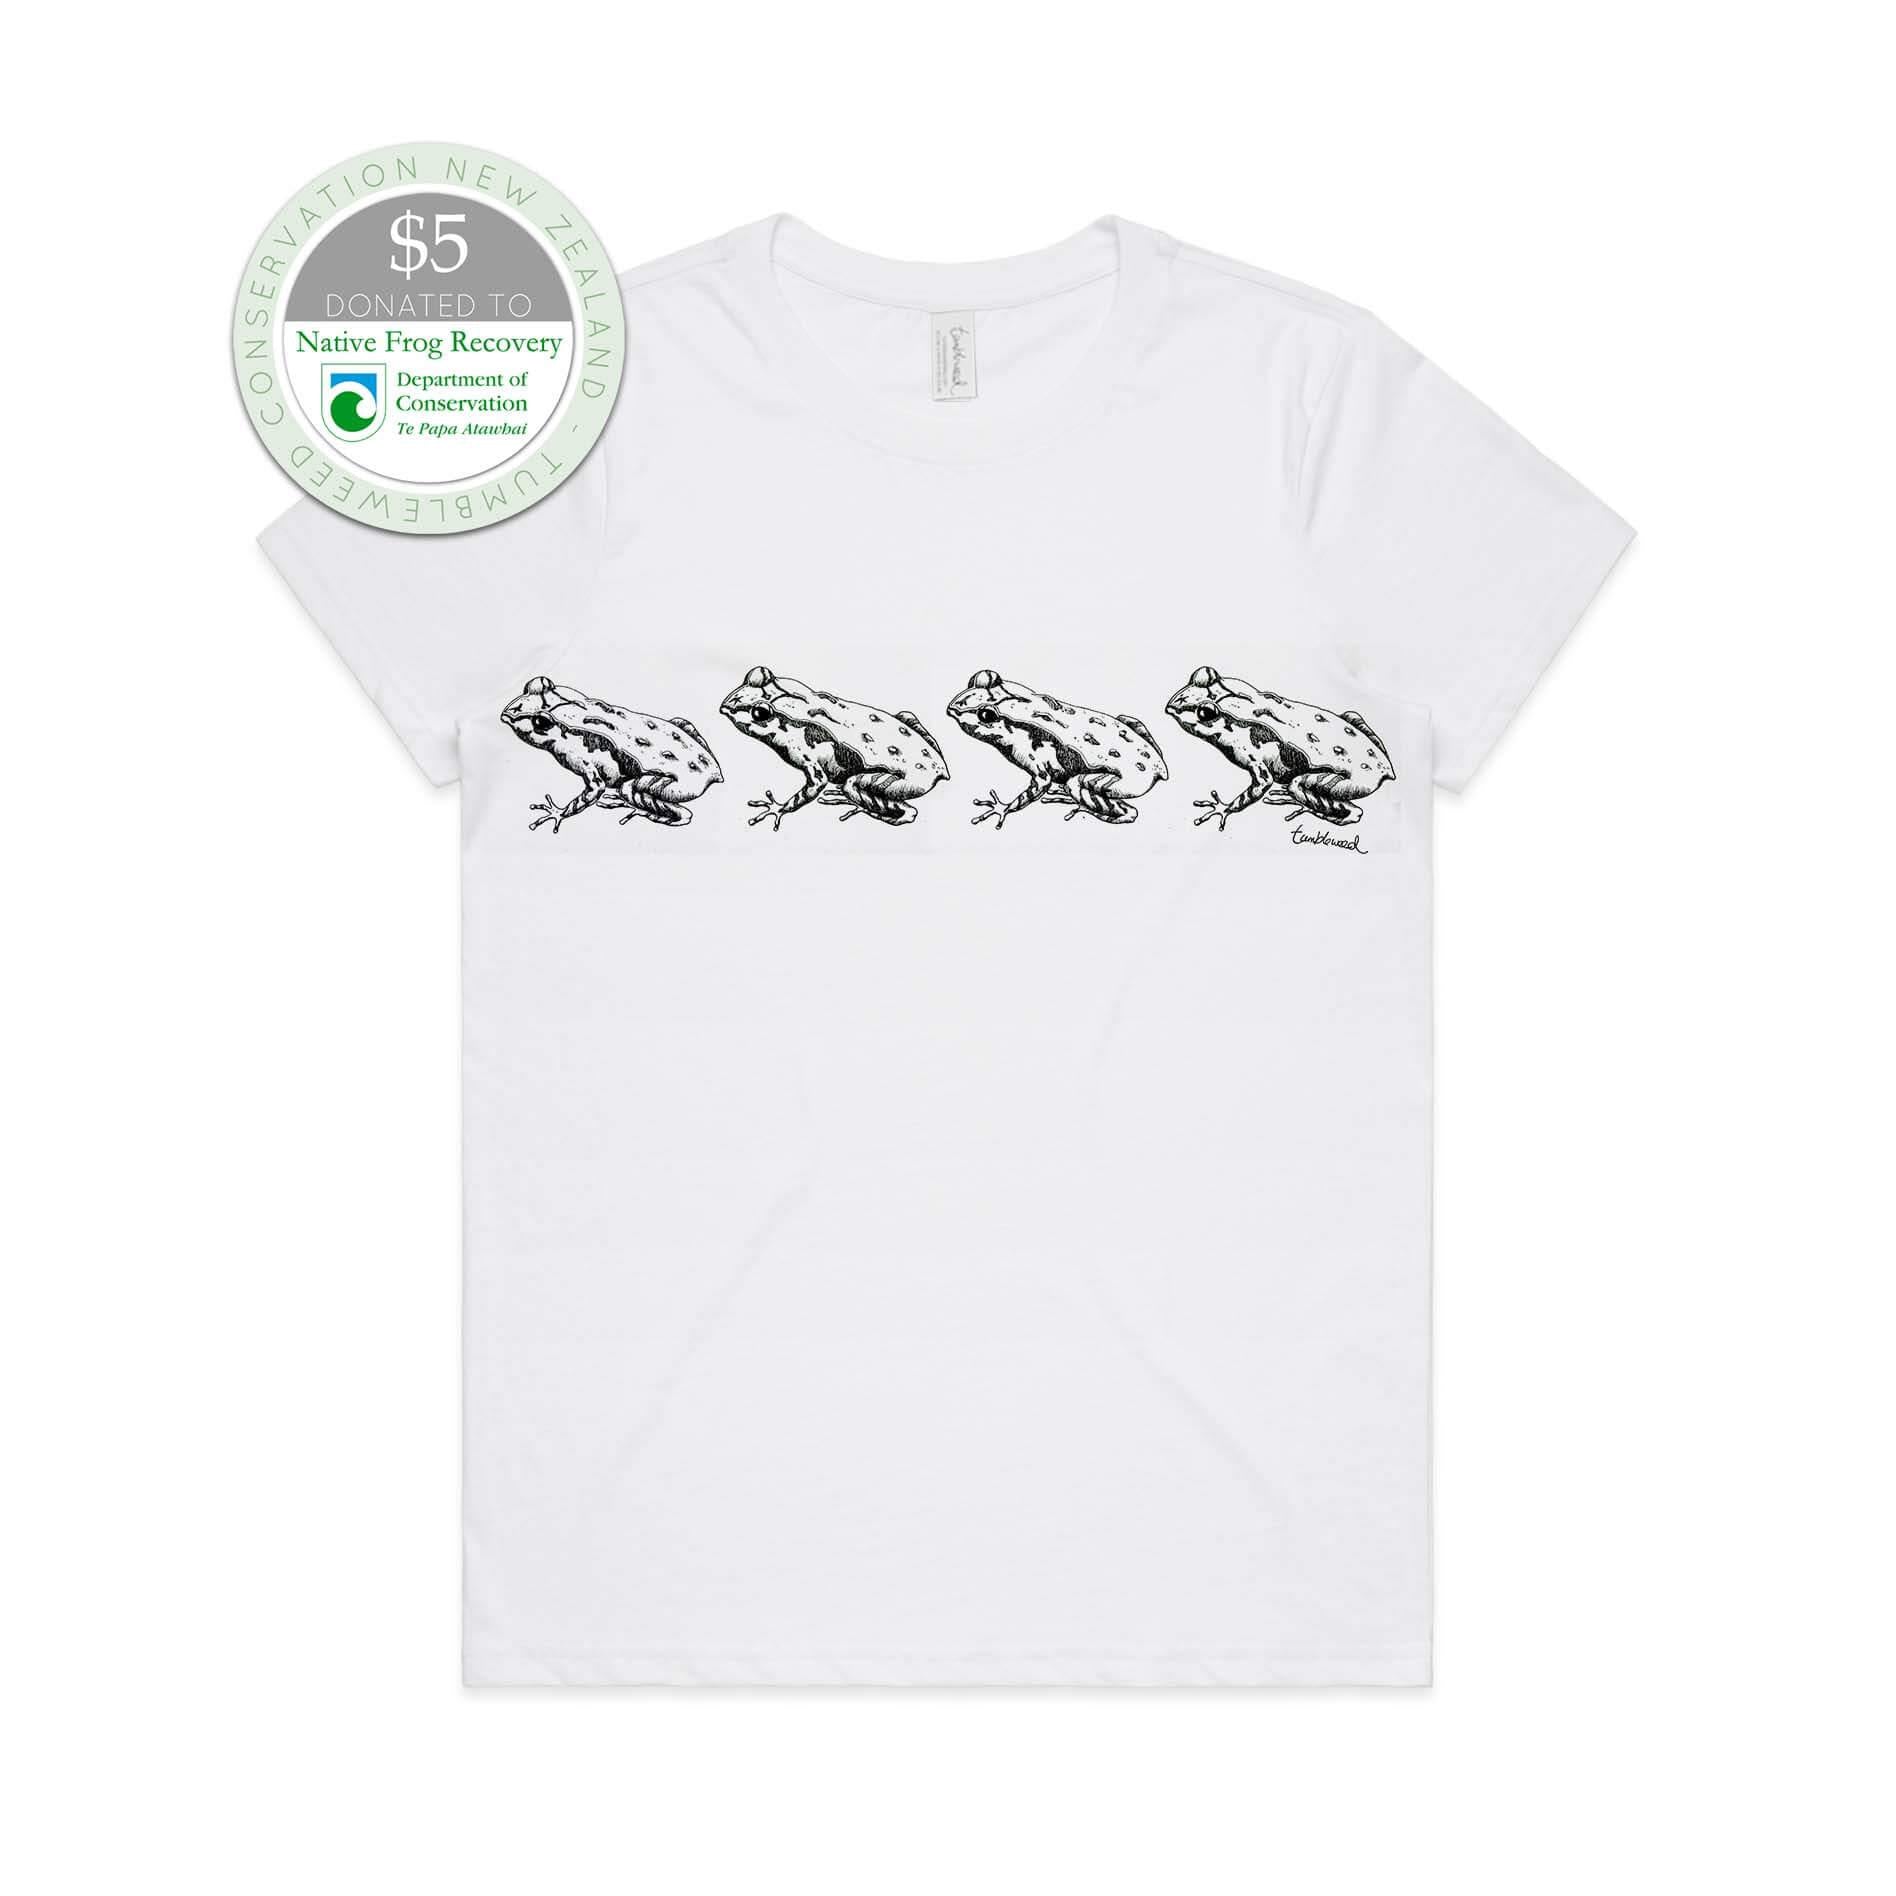 White, female t-shirt featuring a screen printed archey's frog design.